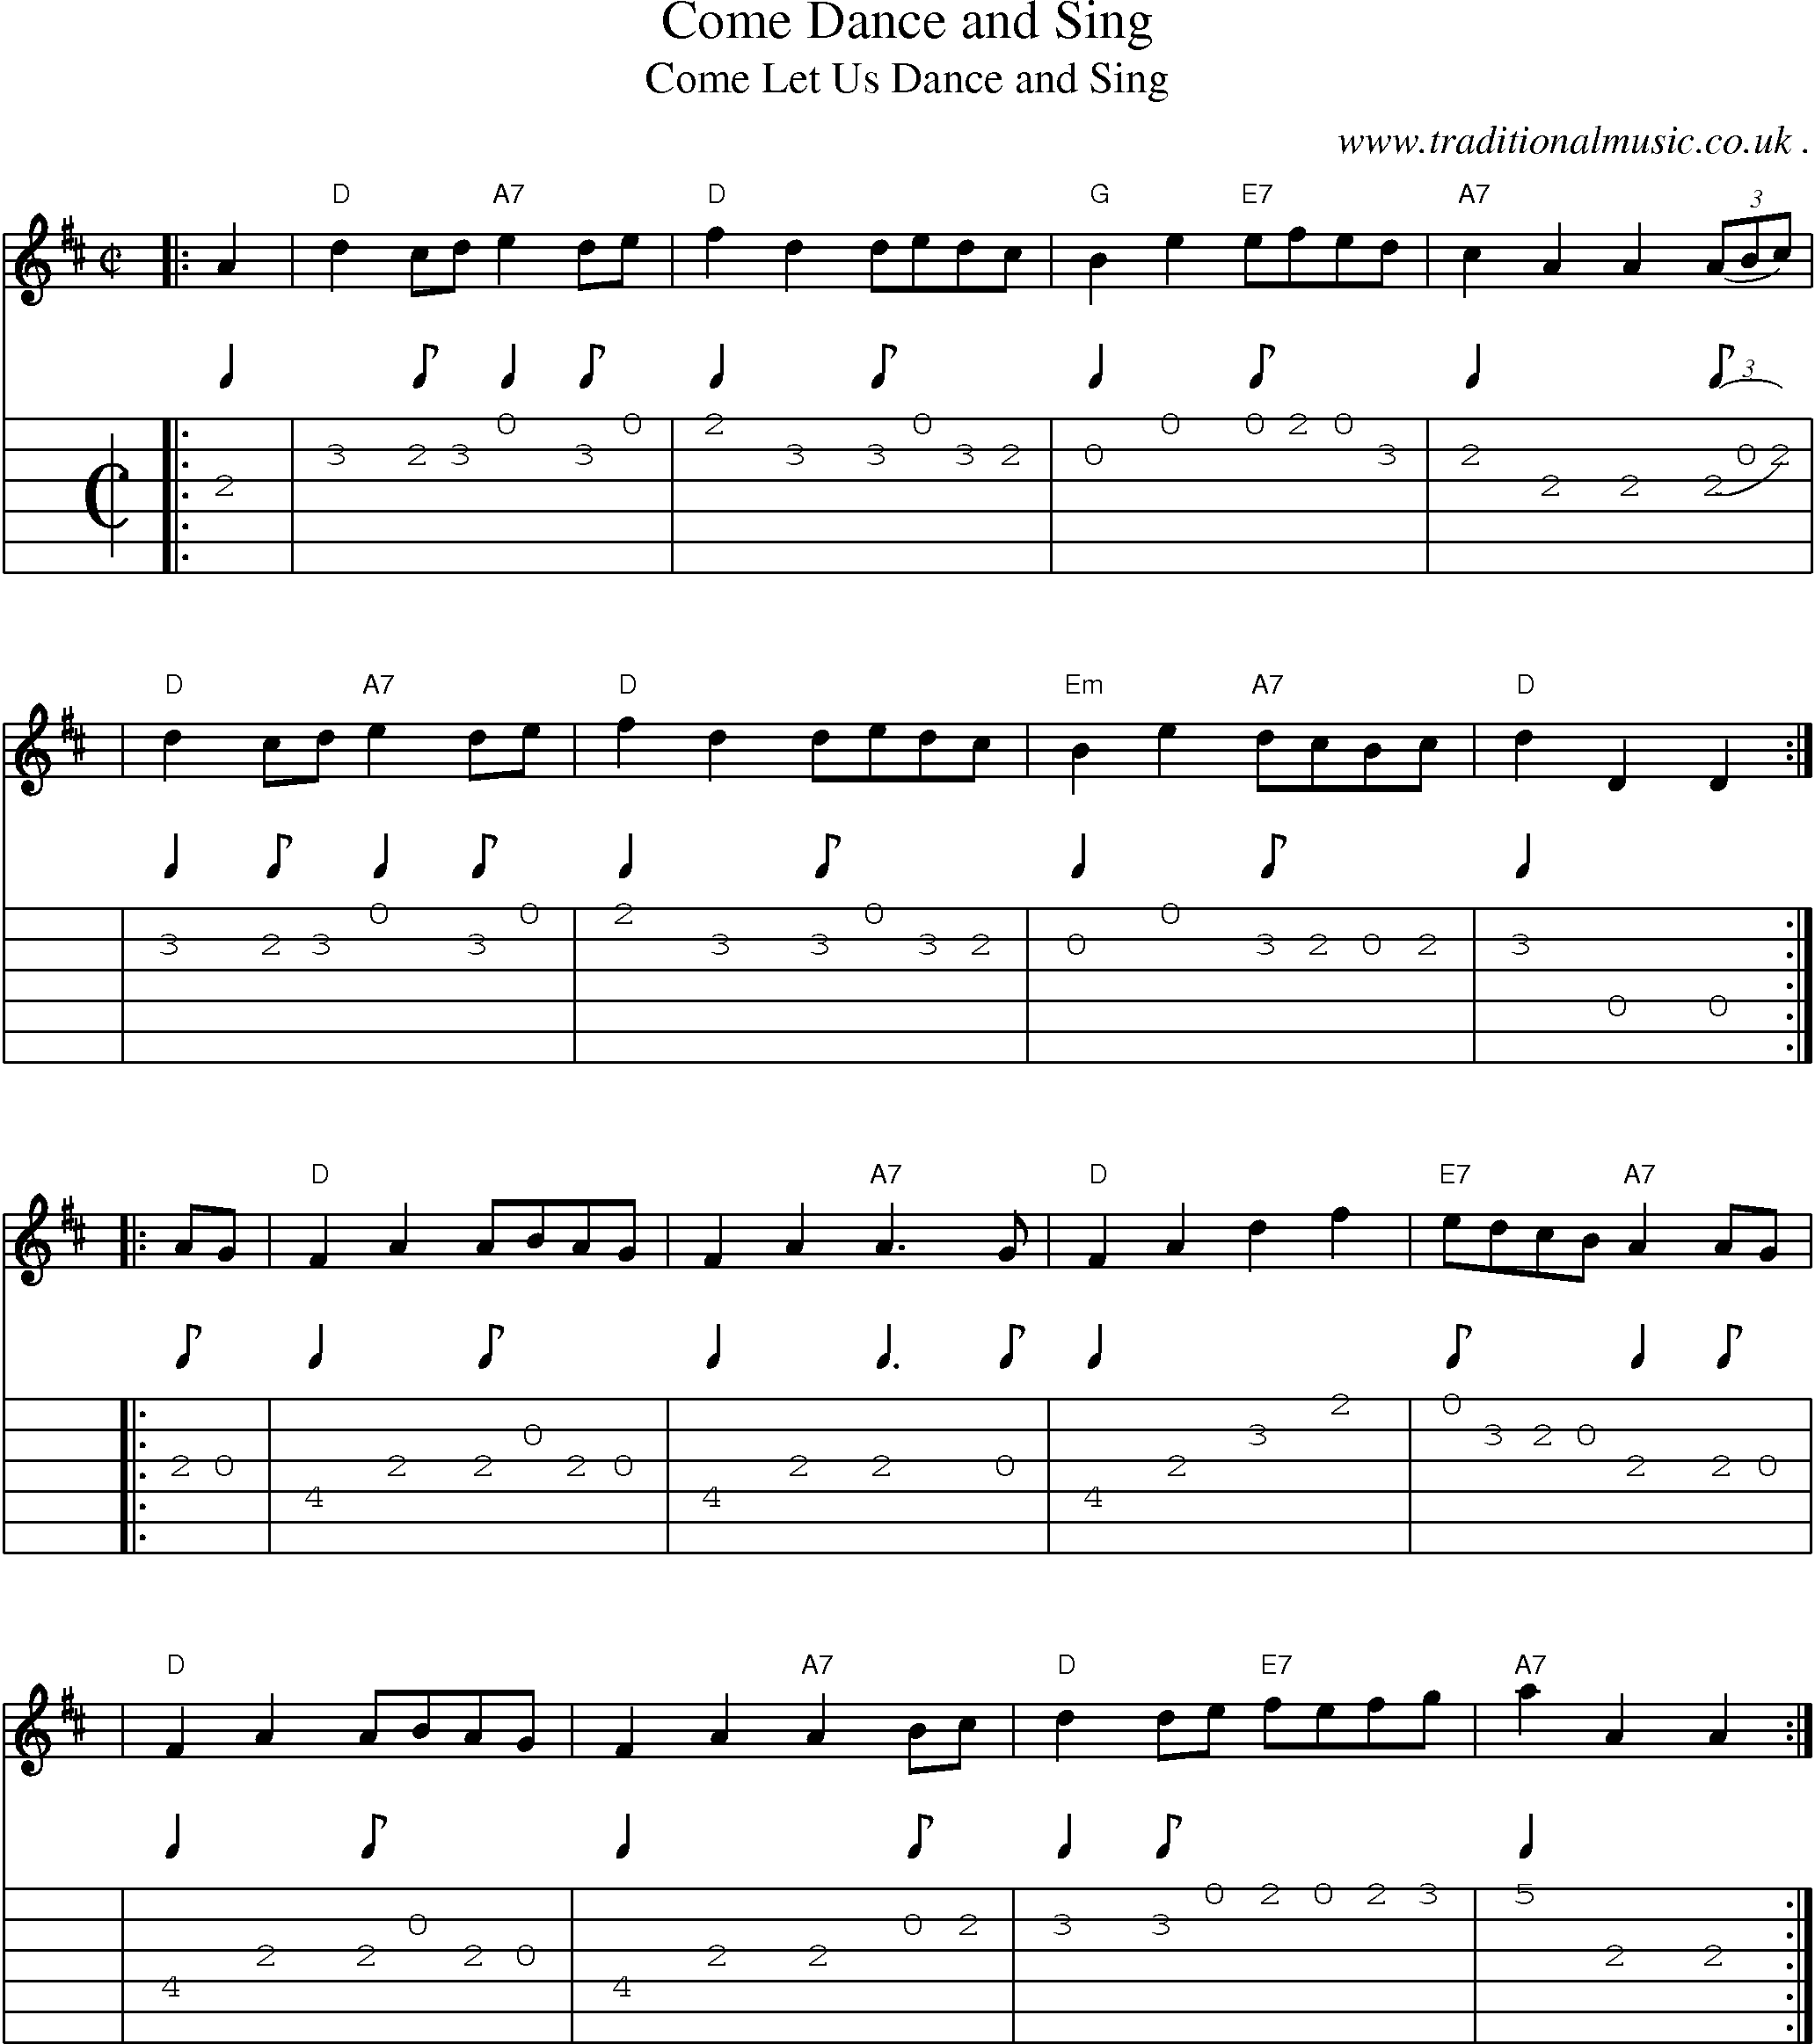 Sheet-music  score, Chords and Guitar Tabs for Come Dance And Sing